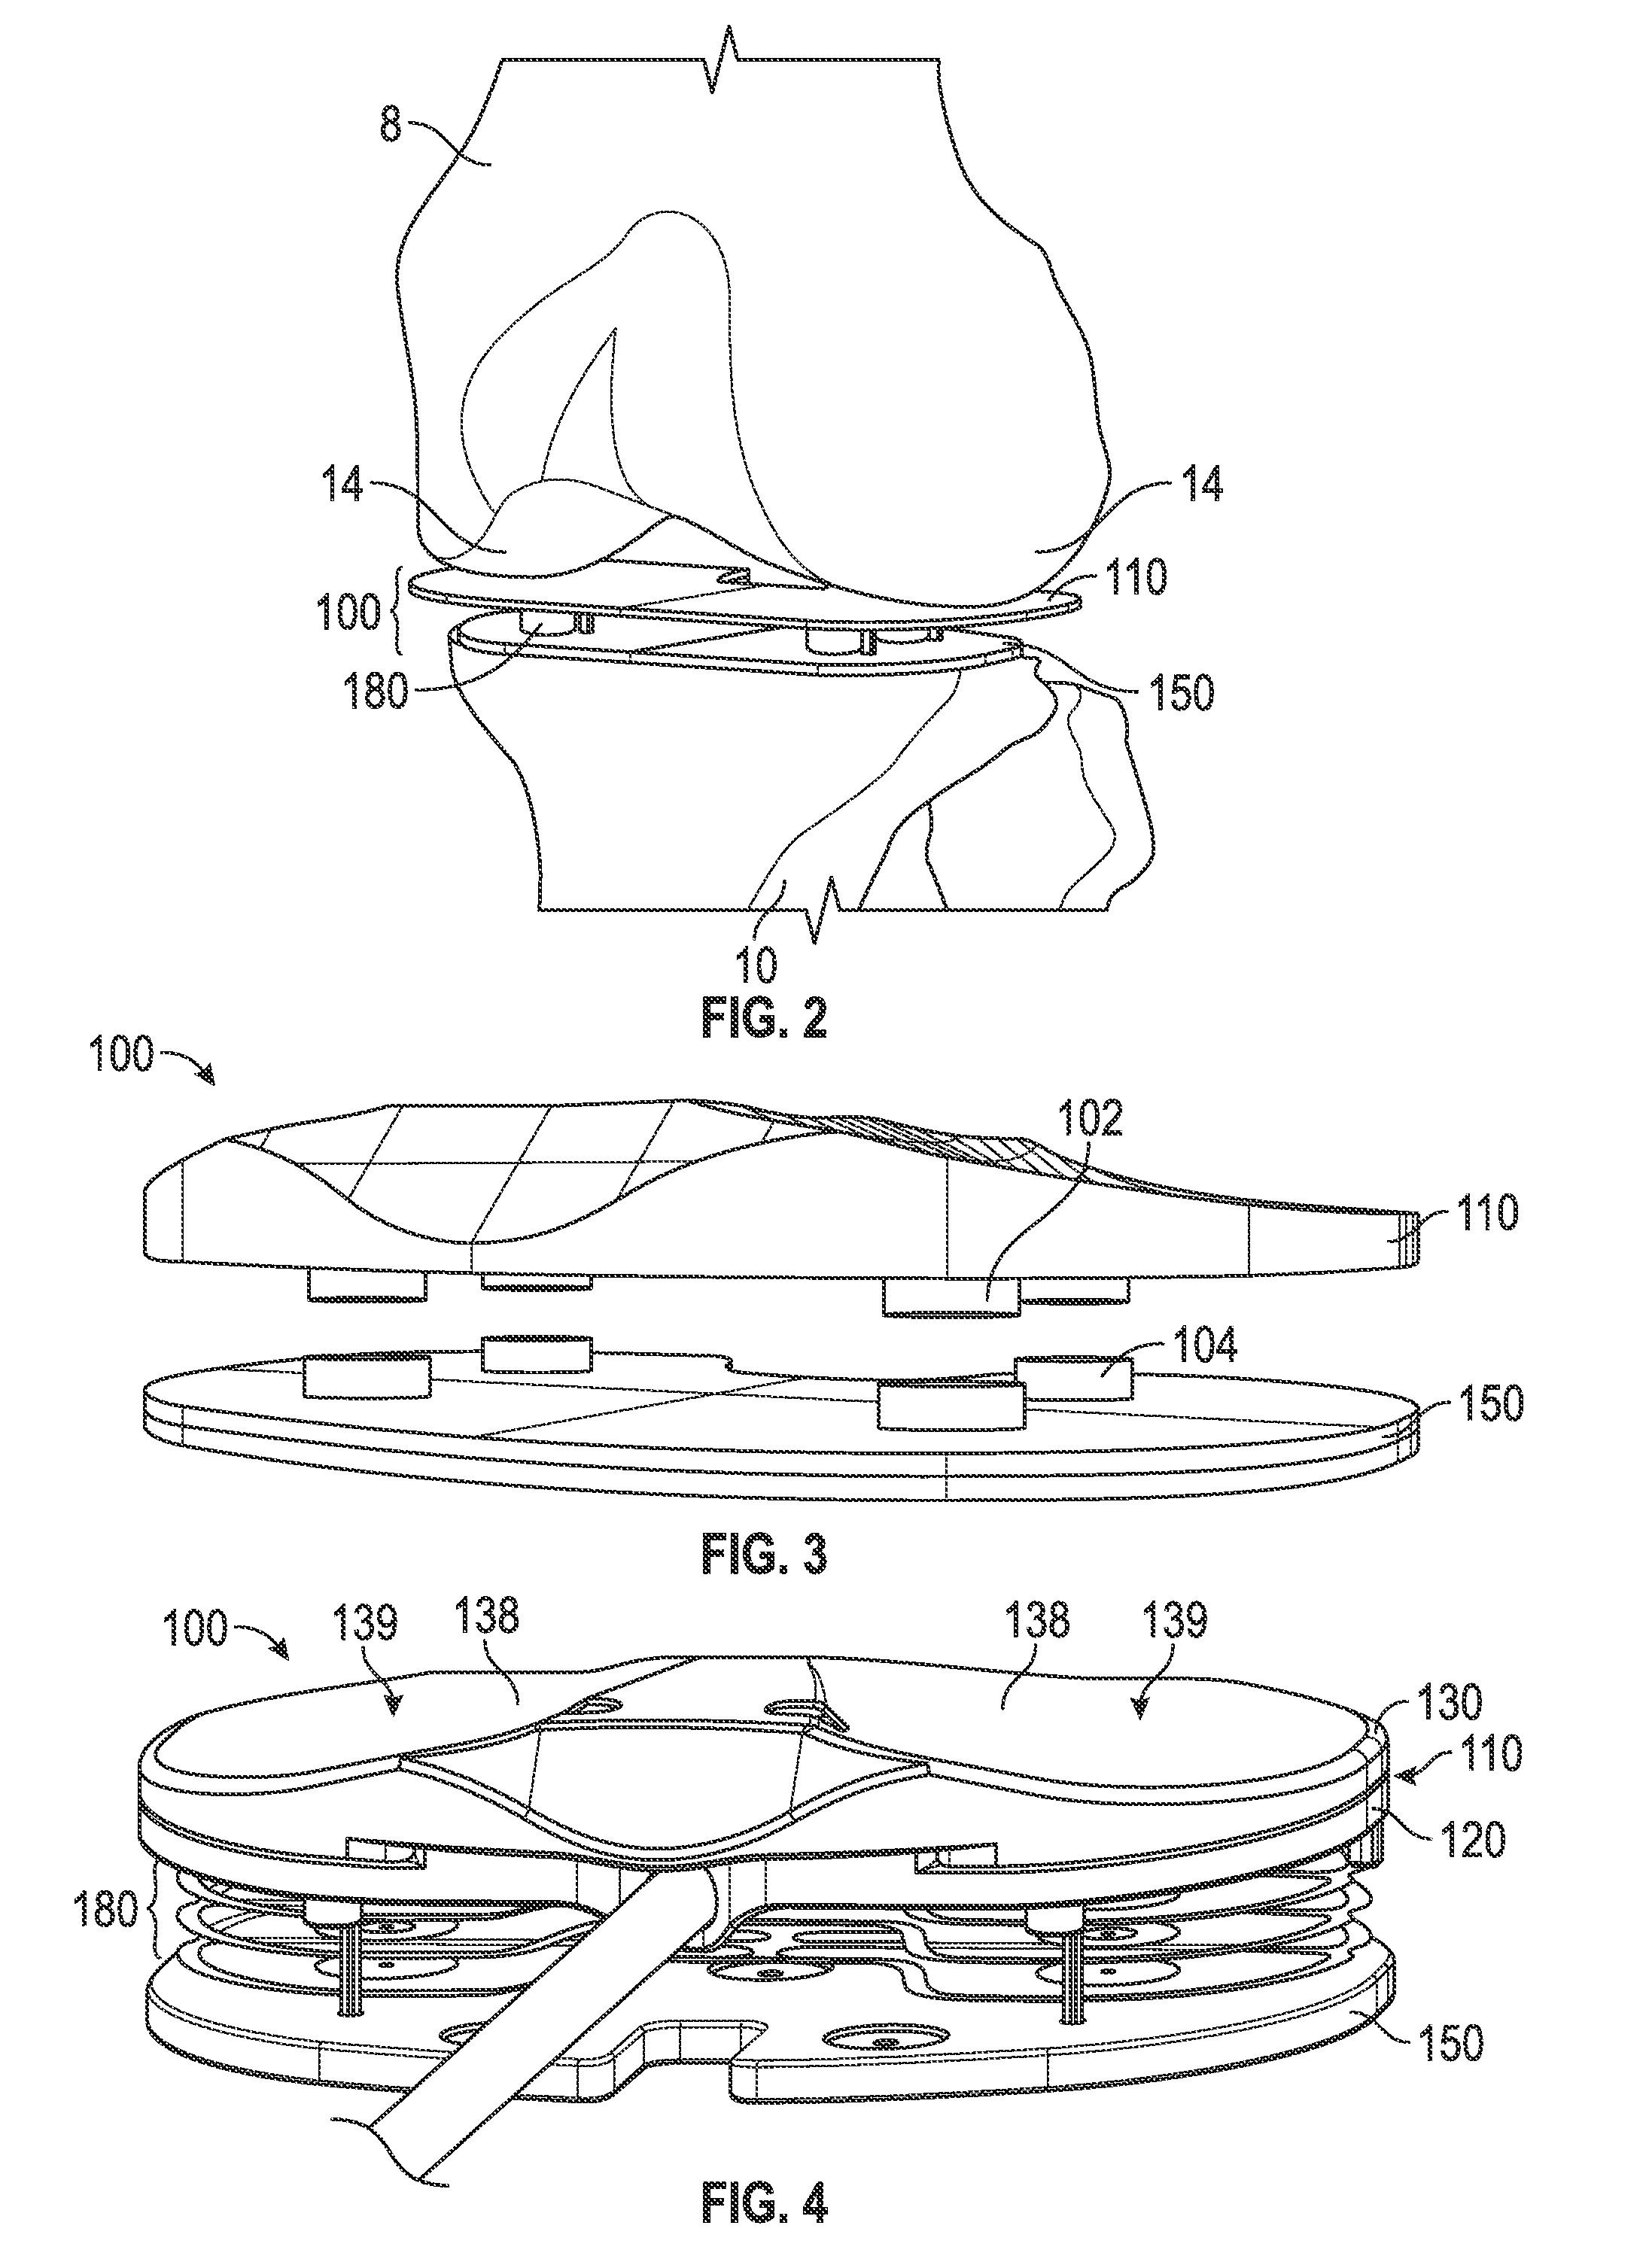 Actuated positioning device for arthroplasty and methods of use